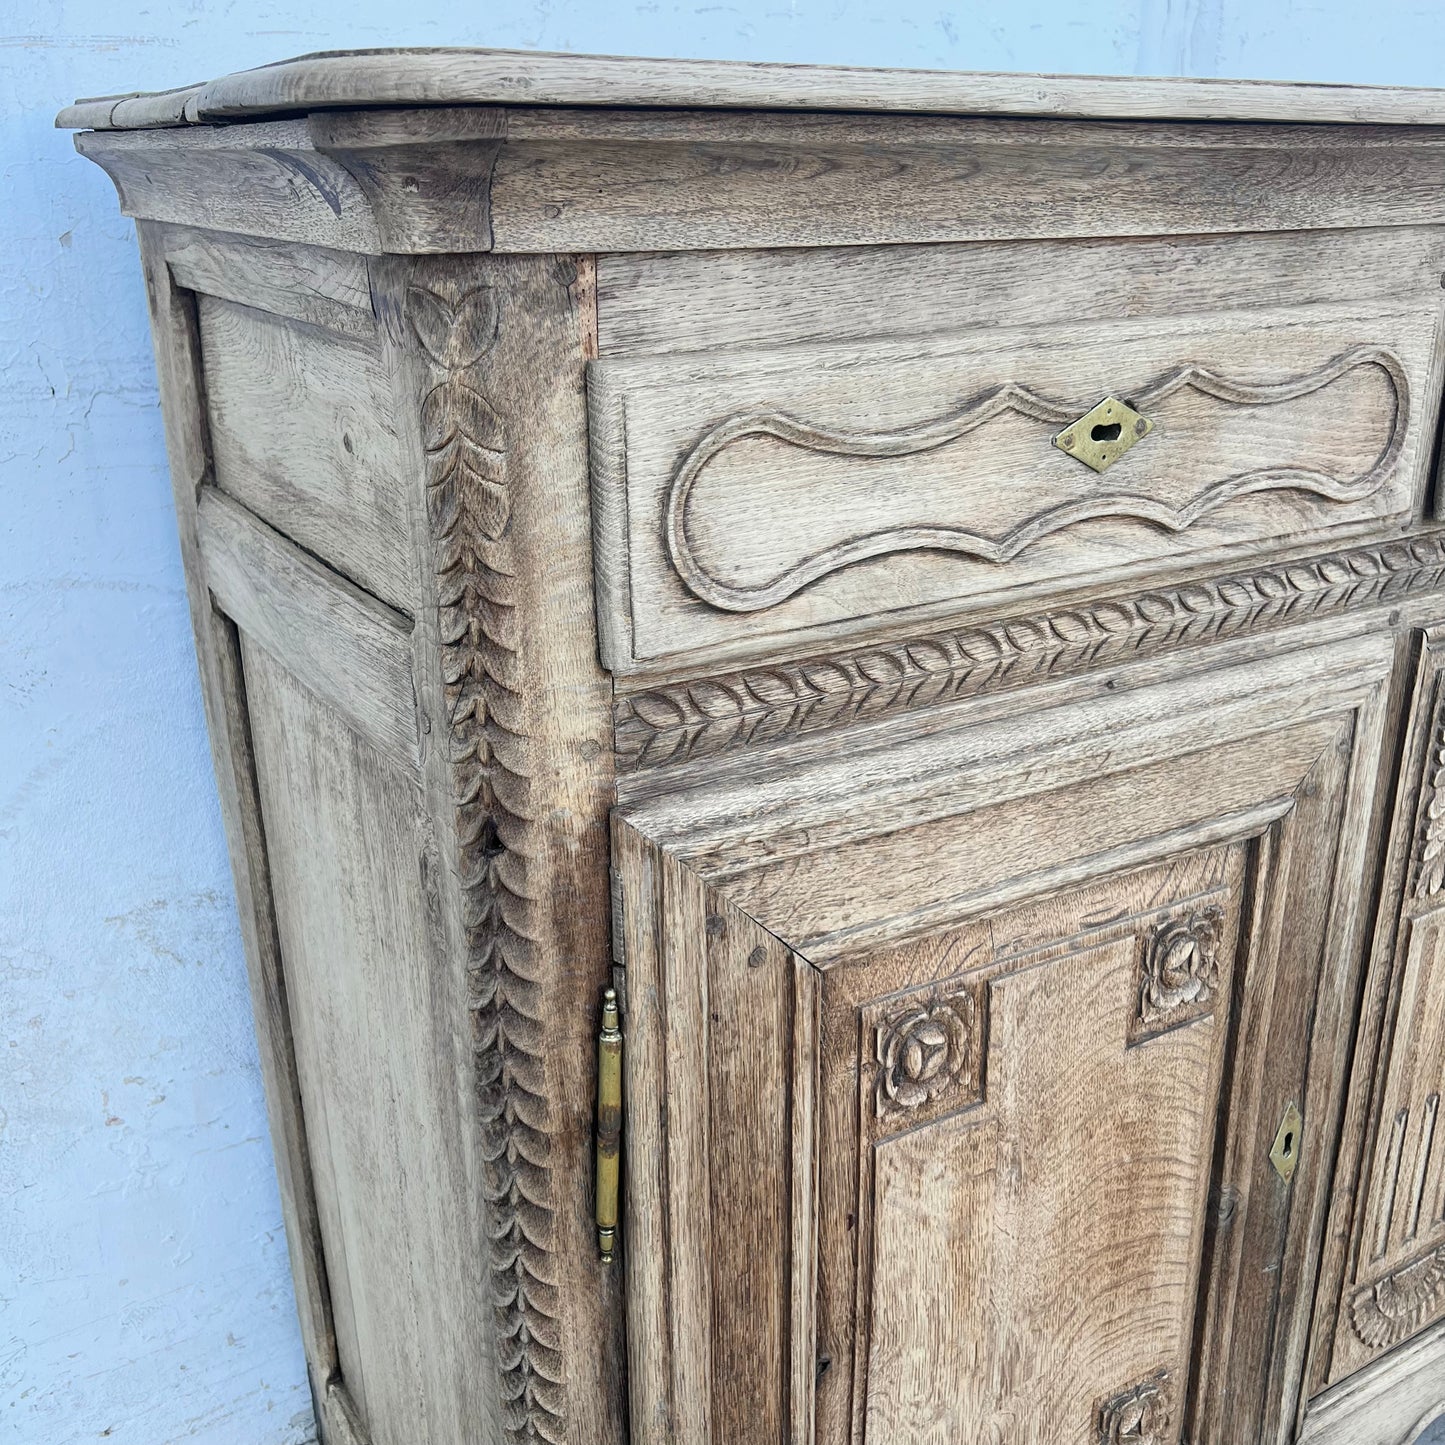 Bleached French Wood Antique Sideboard